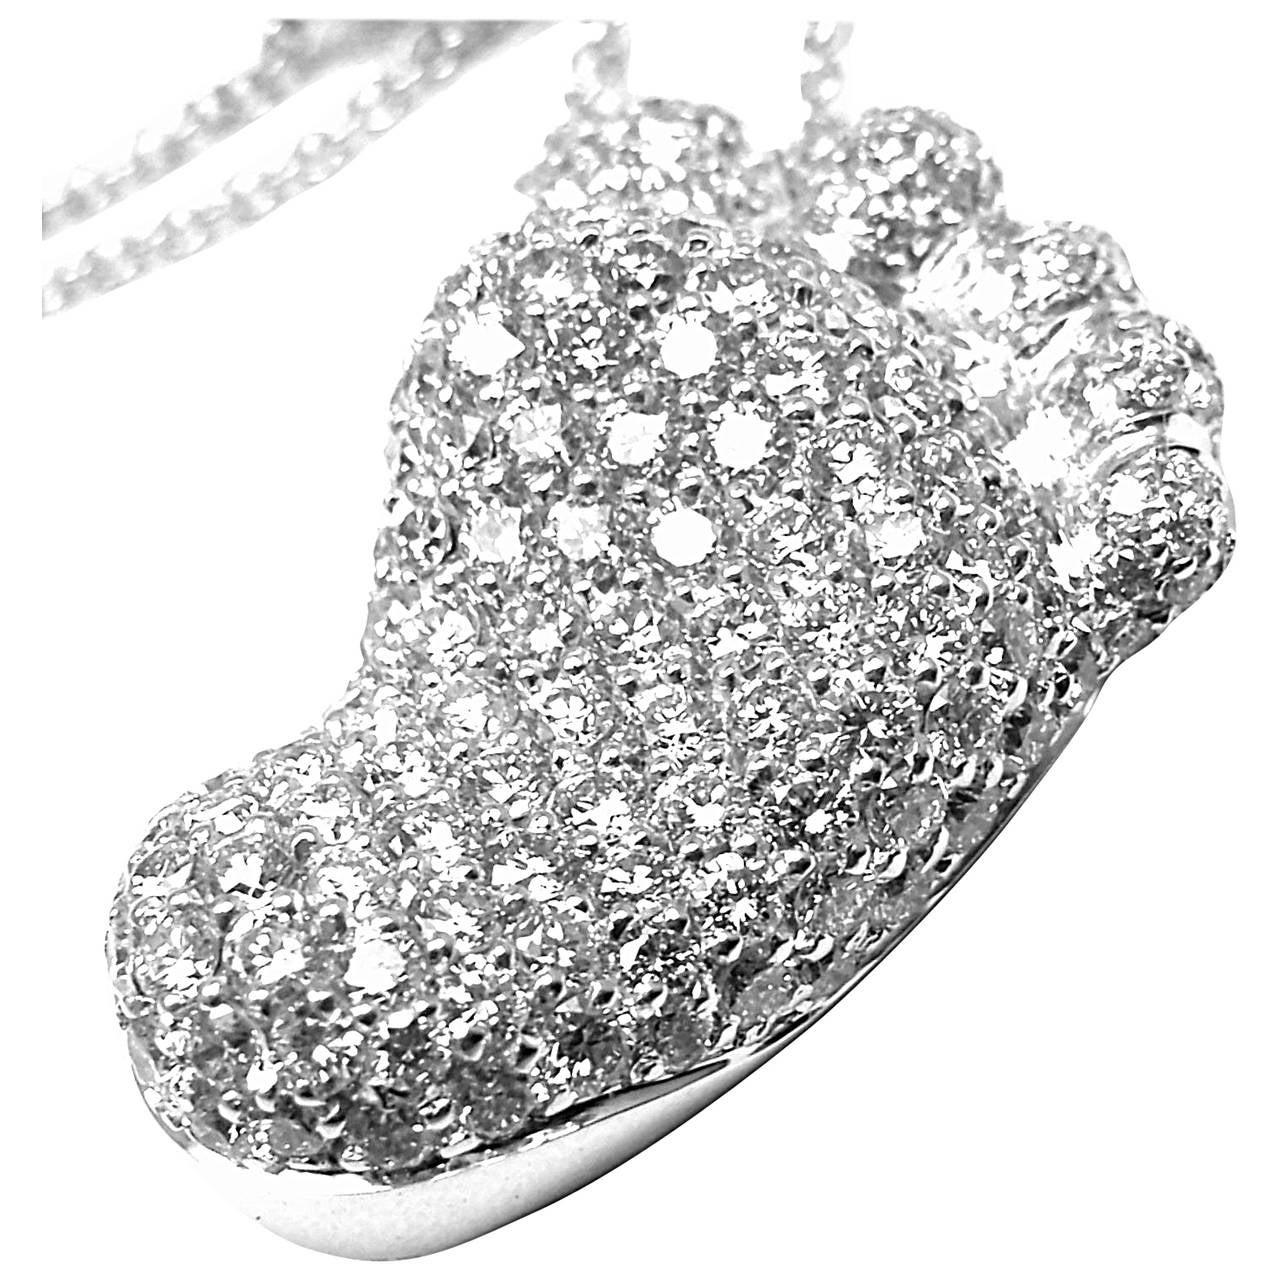 18k White Gold ORME Diamond Foot Pendant Necklace by Pasquale Bruni. 
With Round brilliant cut diamonds total weight approx. 2.6ct 
This necklace comes with Box and Certificate of authenticity.
Retail Price: $26,280
Details:
Length: 22